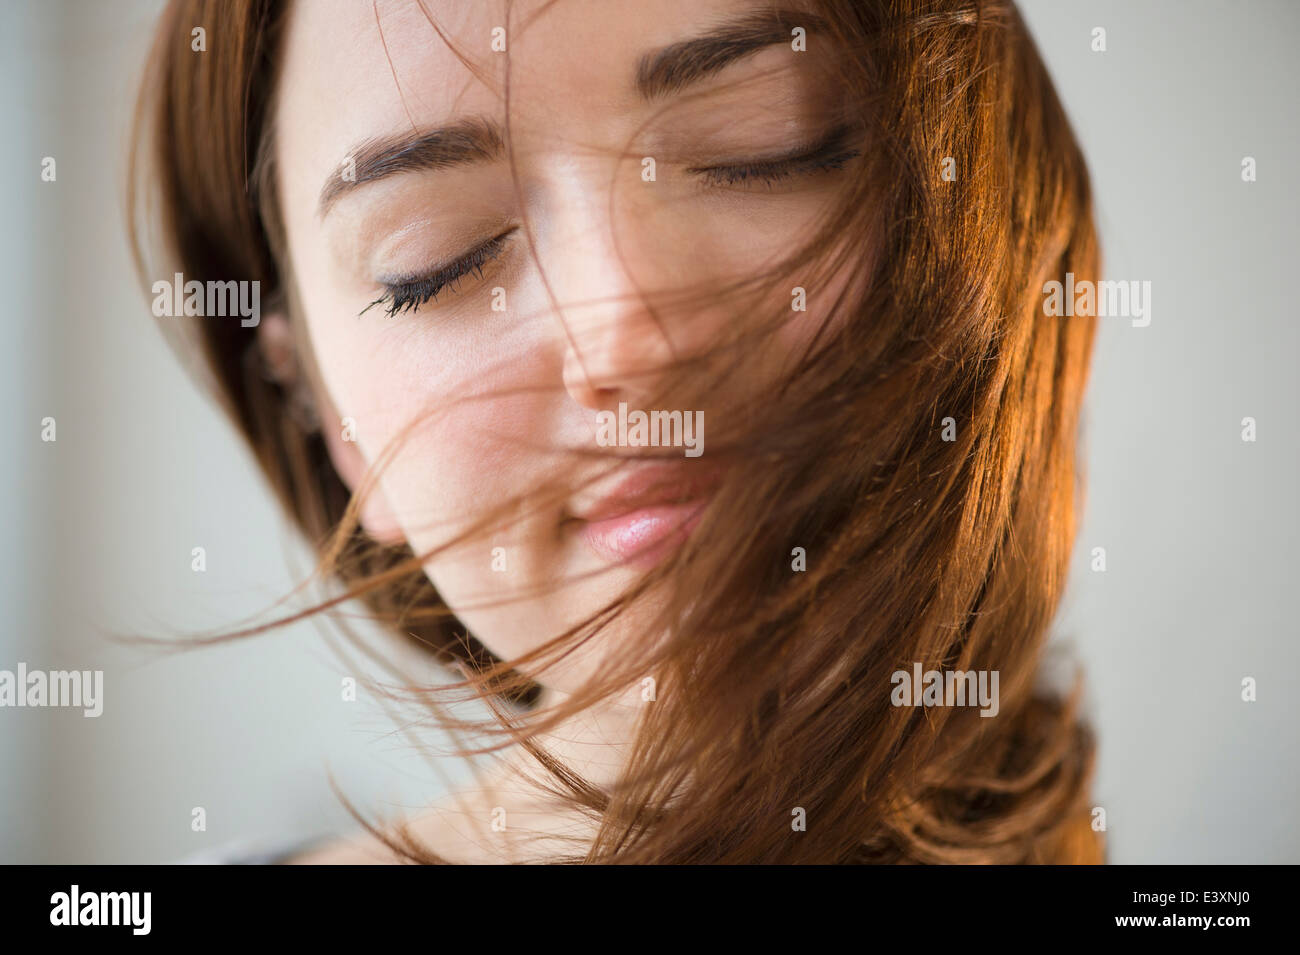 Woman's hair blowing in wind Stock Photo